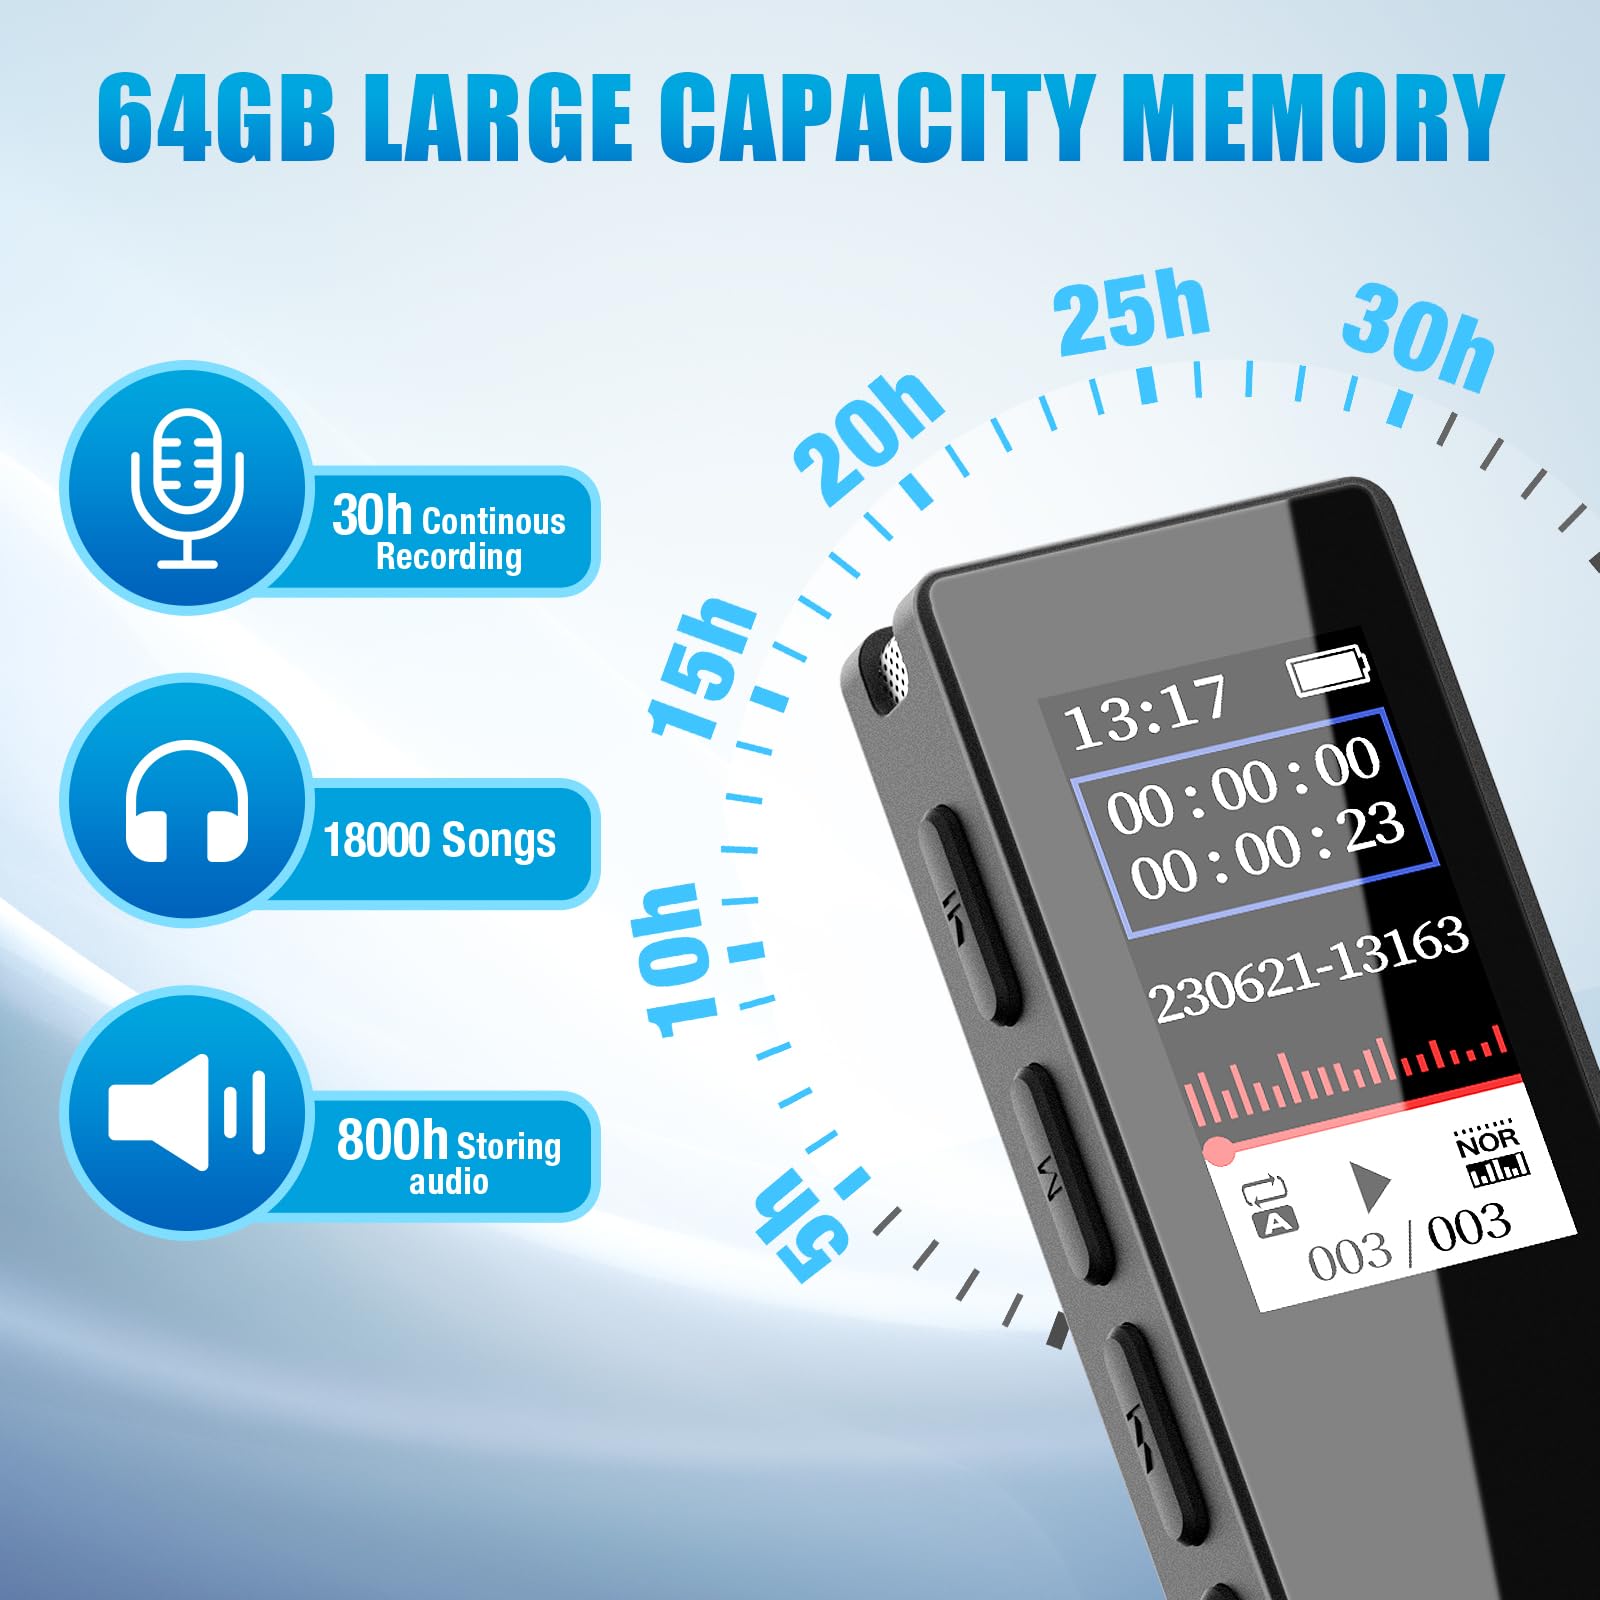 64GB Digital Voice Recorder with Playback, Dual-Microphone Noise Reduction, 30 Hours Audio Recorder, Voice Activated Recorder with MP3, Password, A-B Repeat, for Lectures, Classes, Meetings(n3)